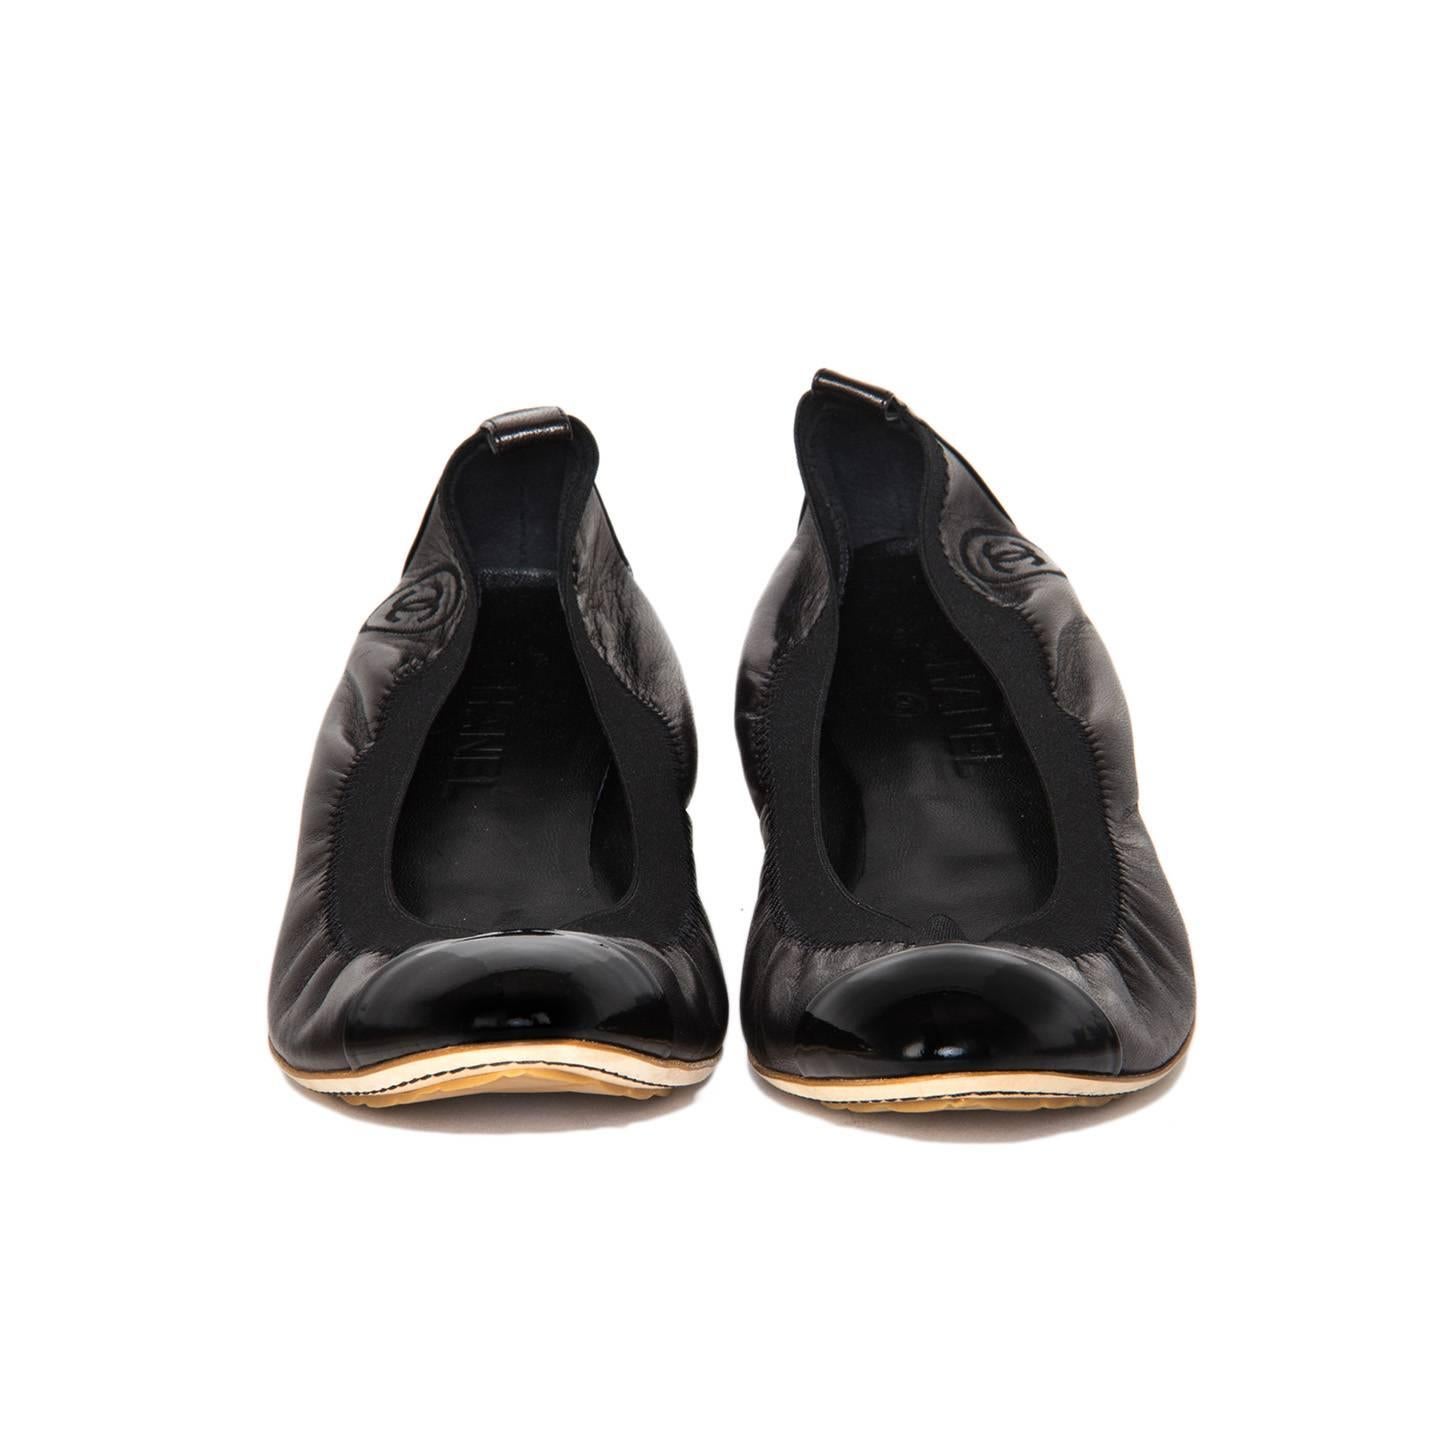 Black leather scrunch ballet flats with patent leather cap toe and heel. A ribbed elastic on top edge is attached to the leather with decorative zigzag stitching and CC Logo. Made in Italy.

Size  41 Italian sizing

Condition  Excellent: never worn